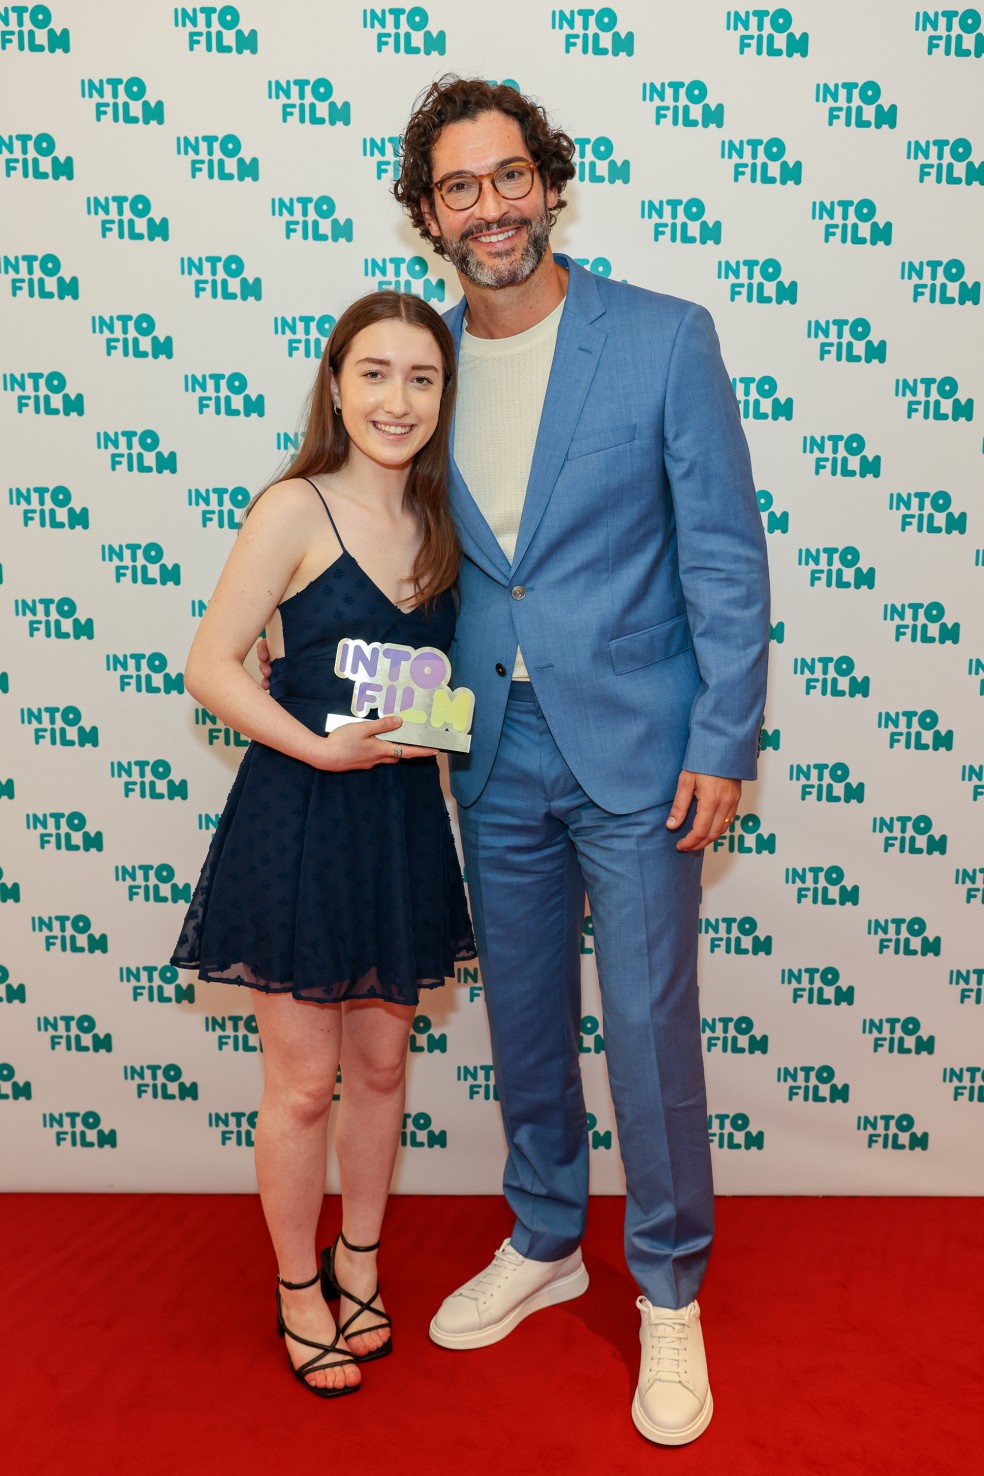 Best Animation - 12 and Over winner Zoe with actor Tom Ellis